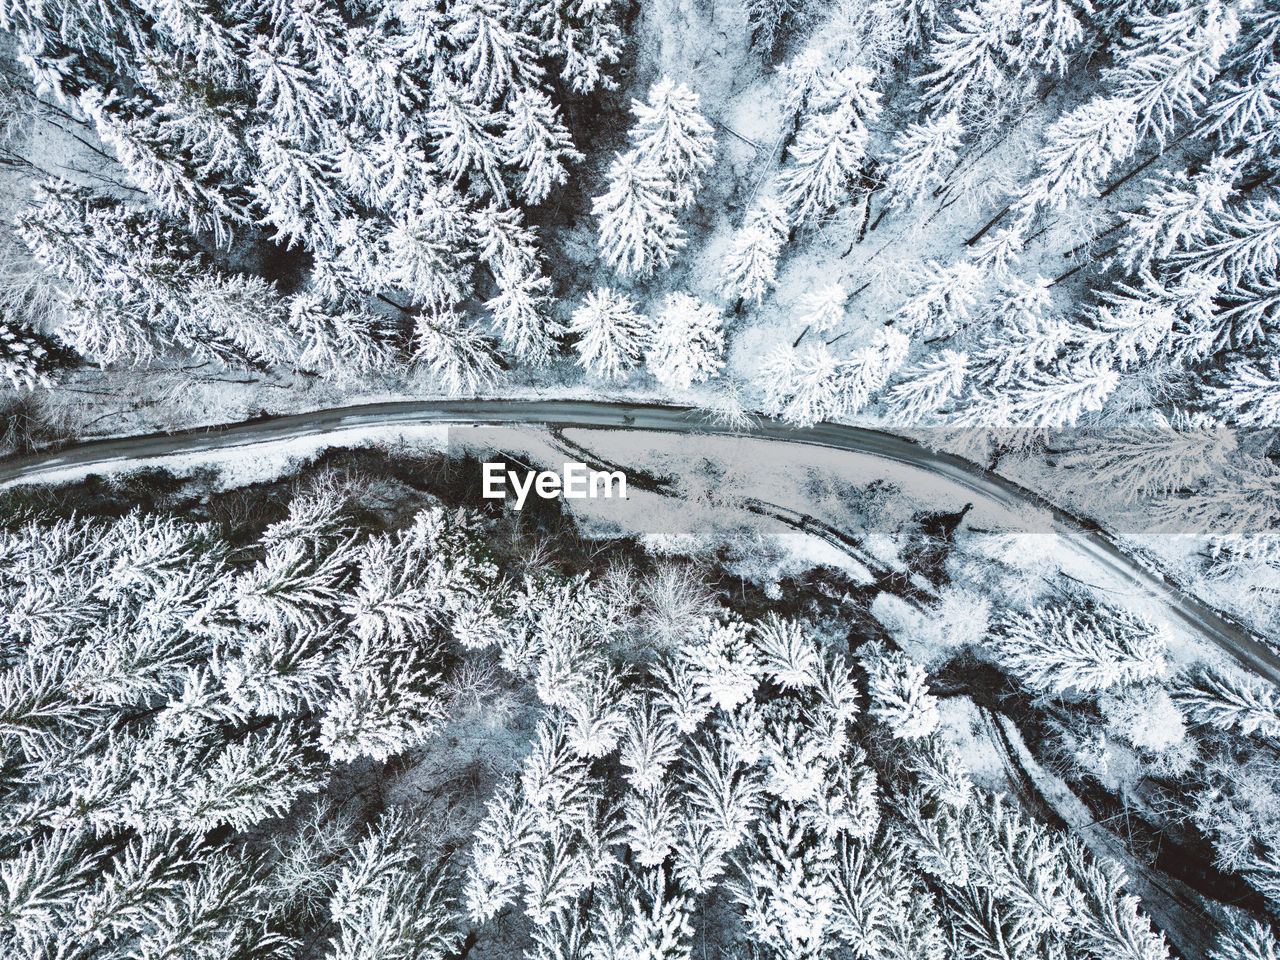 high angle view of frozen water